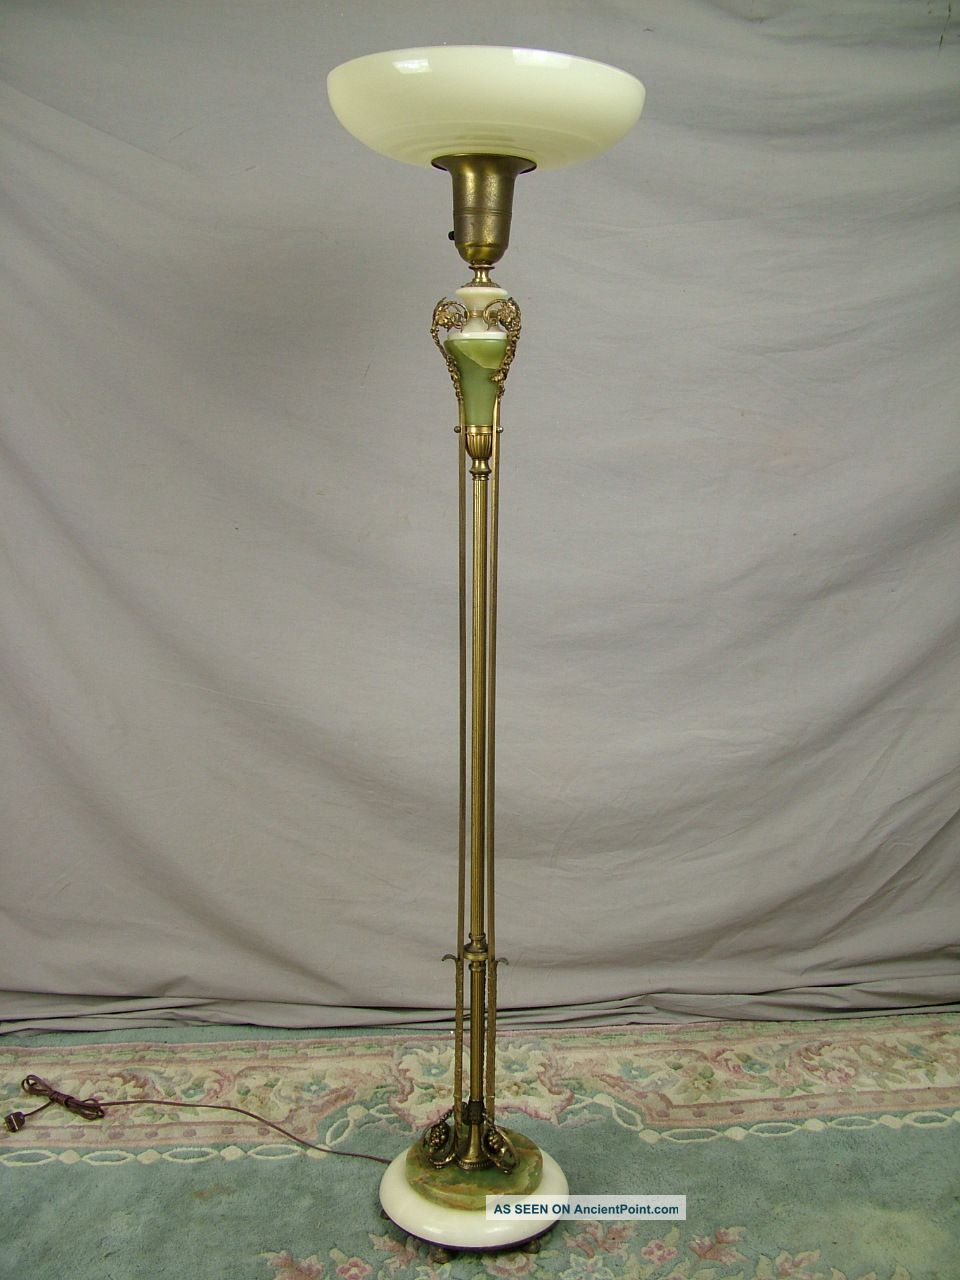 New Antique Brass Floor Lamp With Marble Base French pertaining to dimensions 960 X 1280